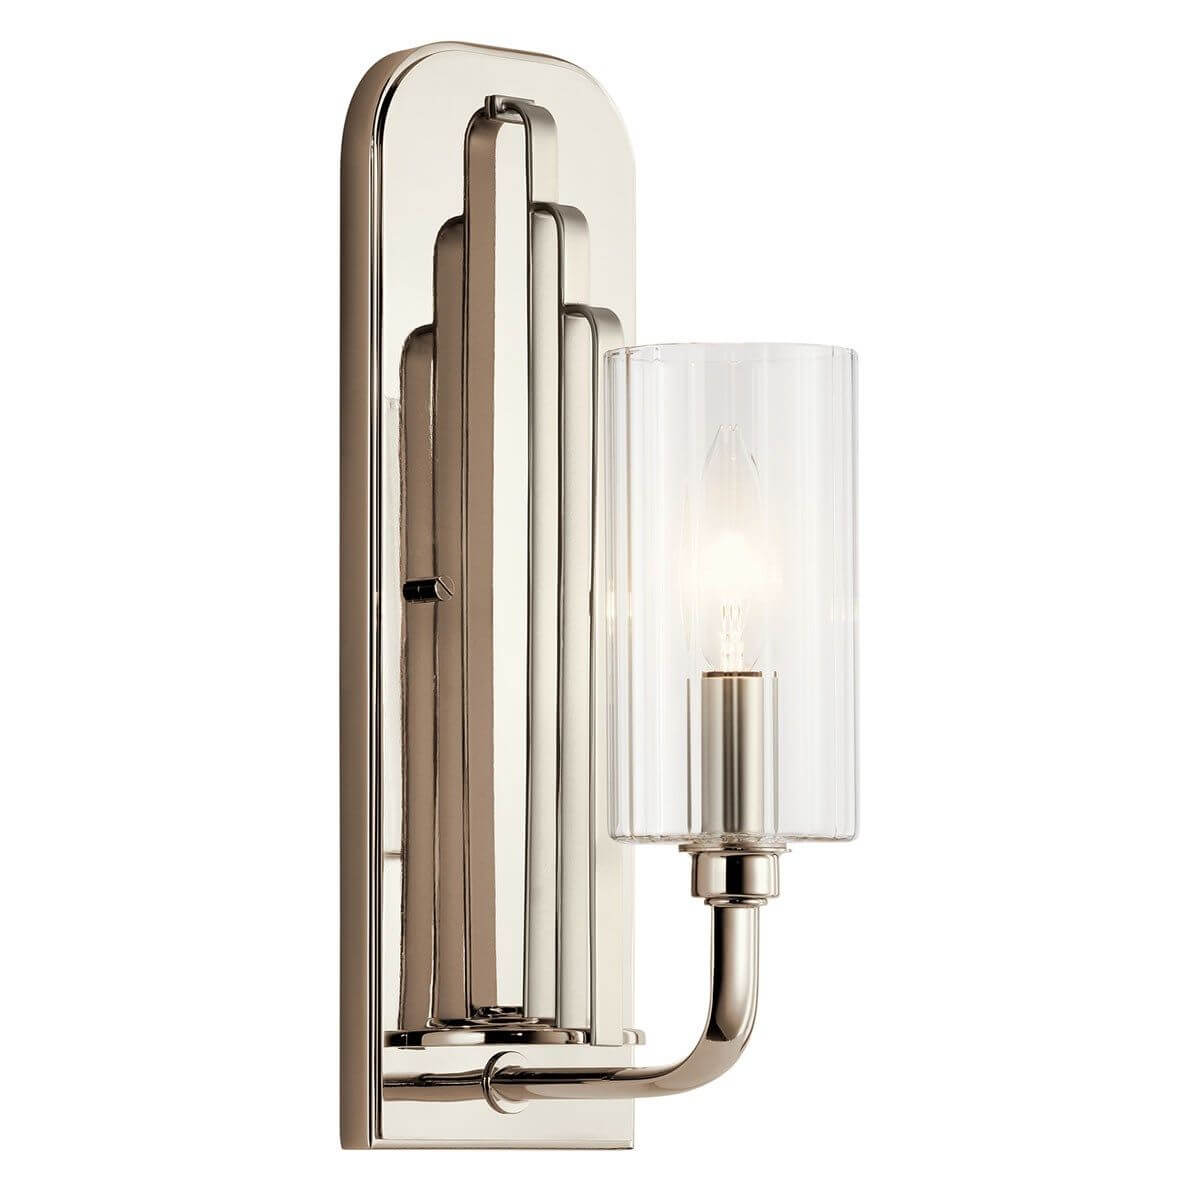 1 Light 14 inch Tall Wall Sconce in Polished Nickel with Clear Fluted Glass - 233769